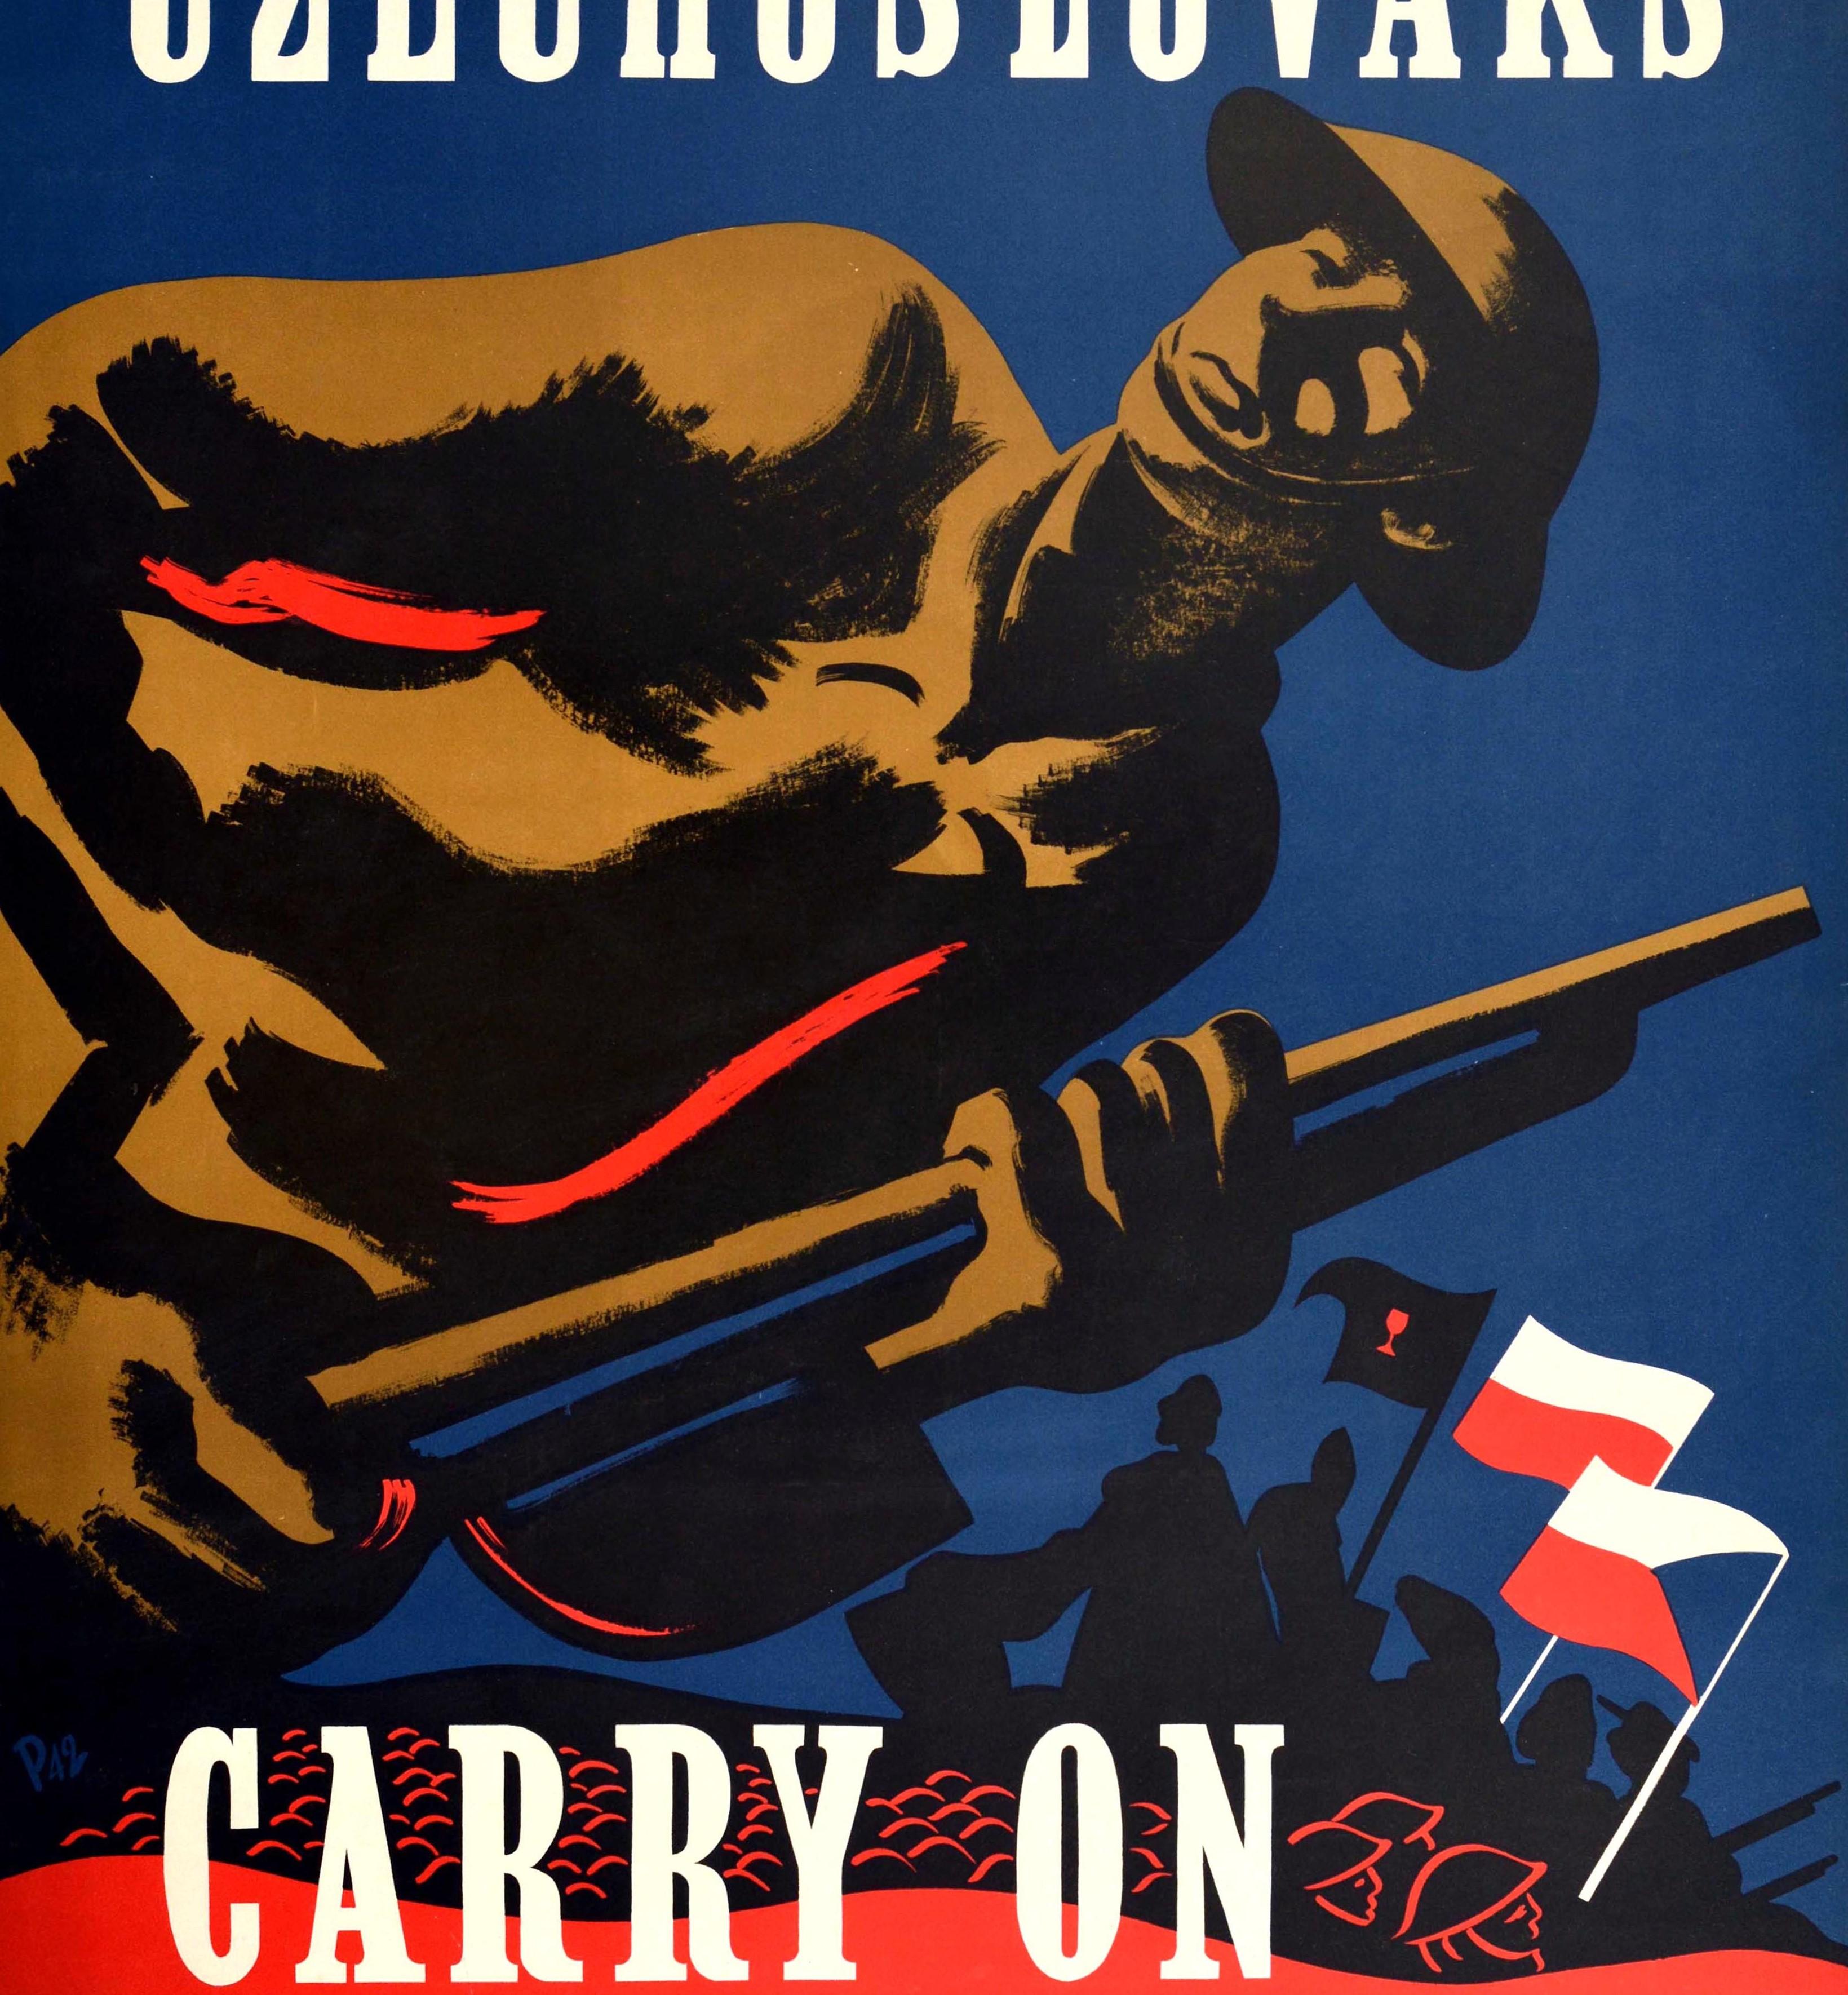 Original Vintage Poster Czechoslovaks Carry On WWII Soldiers Army Flags War Art - Black Print by T. Peel